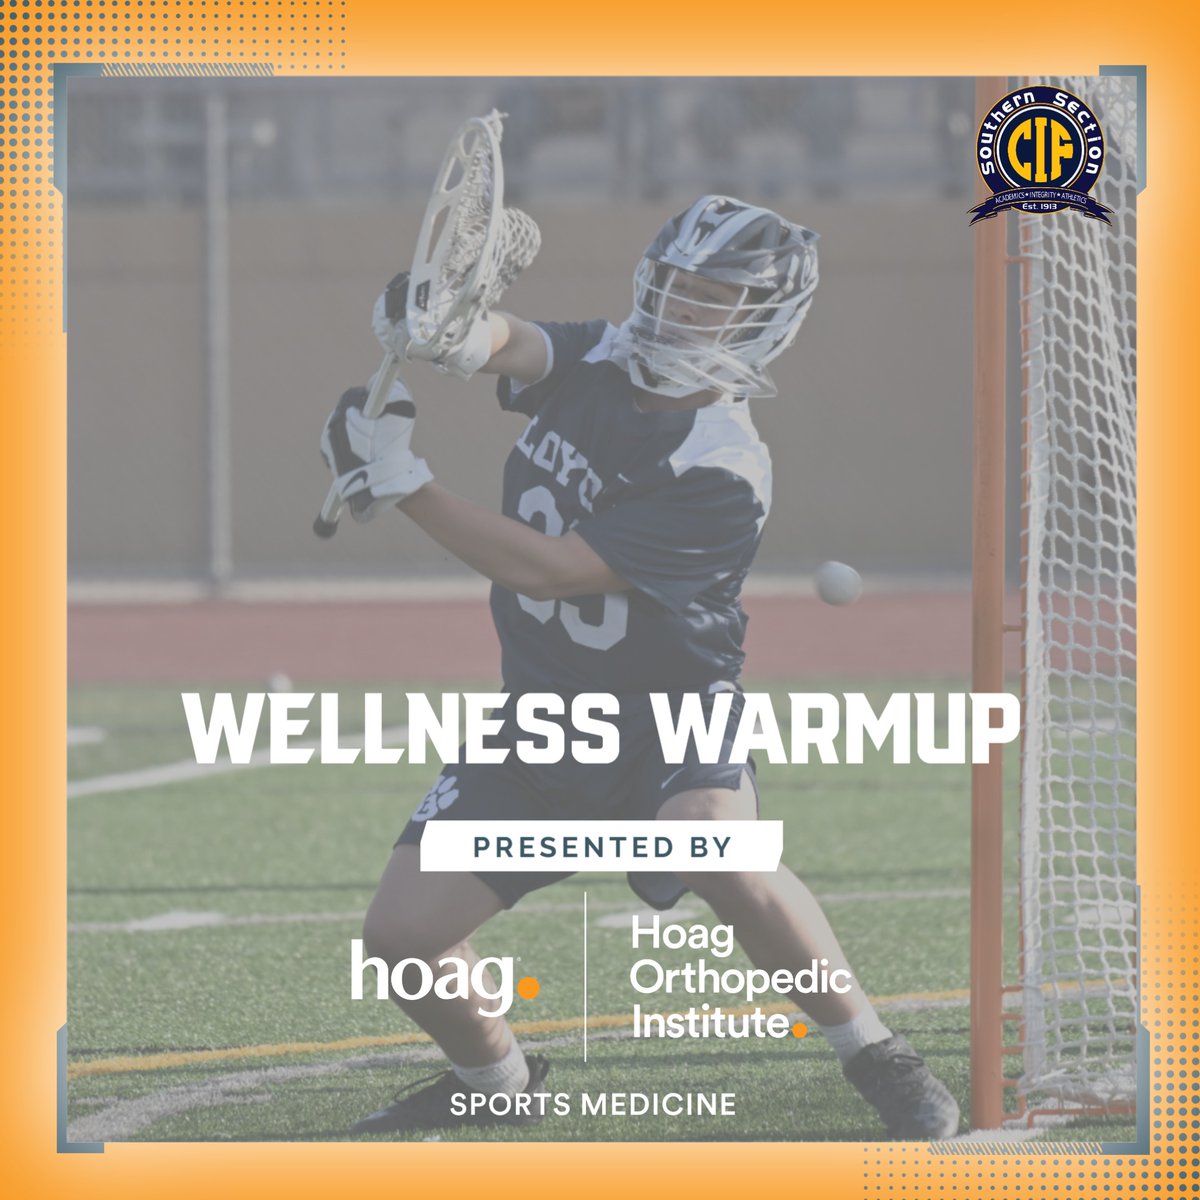 Today's #WellnessWarmup presented by @hoaghealth and @hoagorthopedic focuses on the importance of core stability and provides helpful tips on which common exercises can elevate your core strength. Check out the link in our bio for the breakdown! 💪